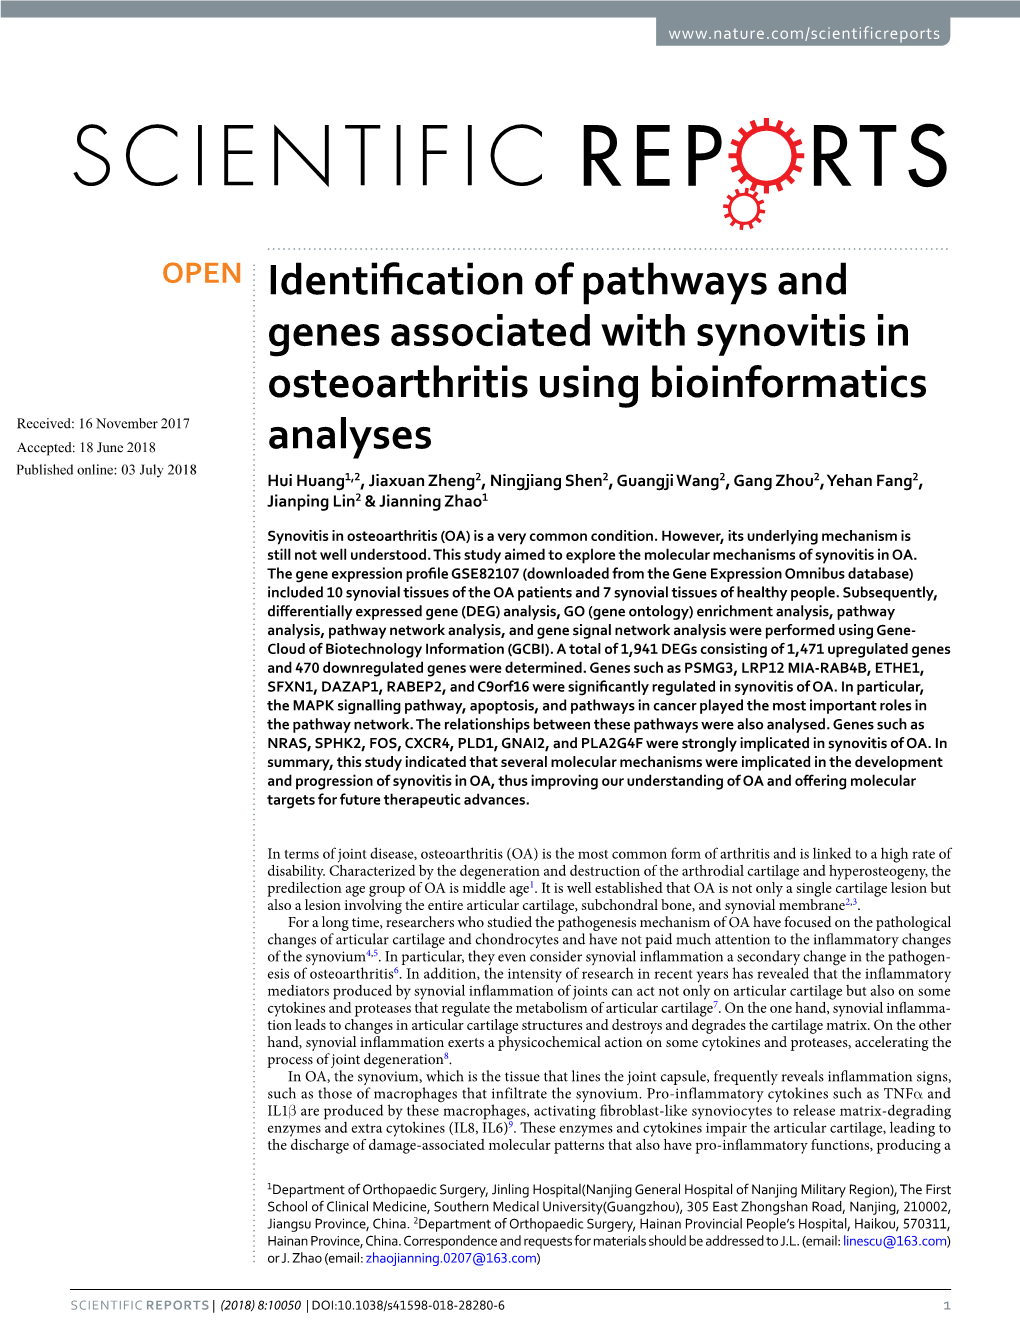 Identification of Pathways and Genes Associated with Synovitis In